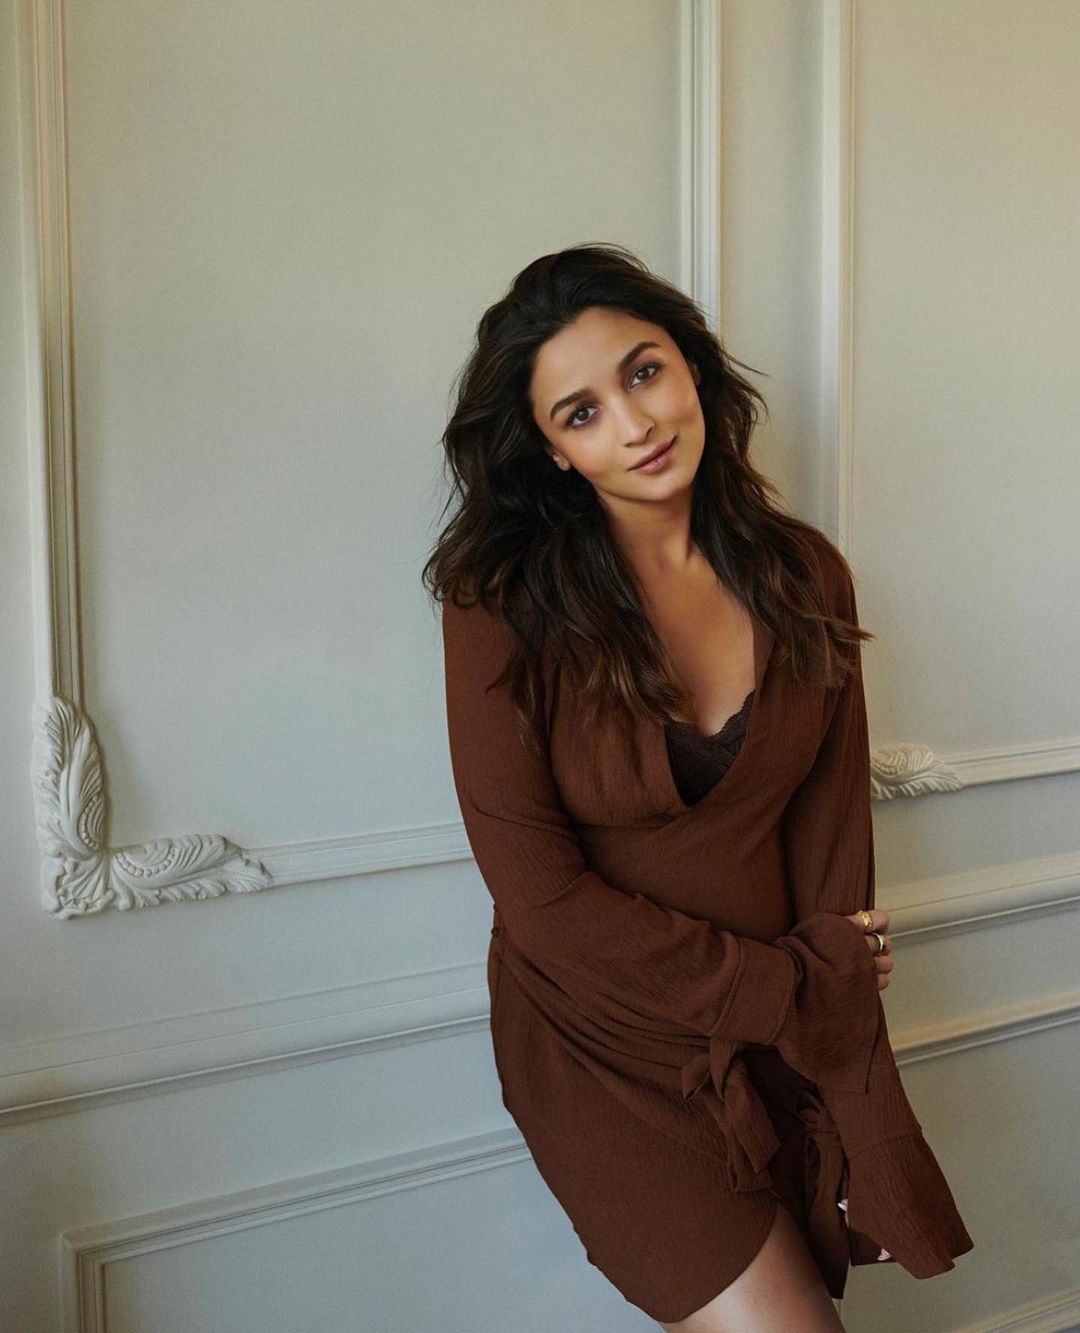 Alia Bhatt poses in Brown Color Short Dress During Photoshoot, Aug 2022